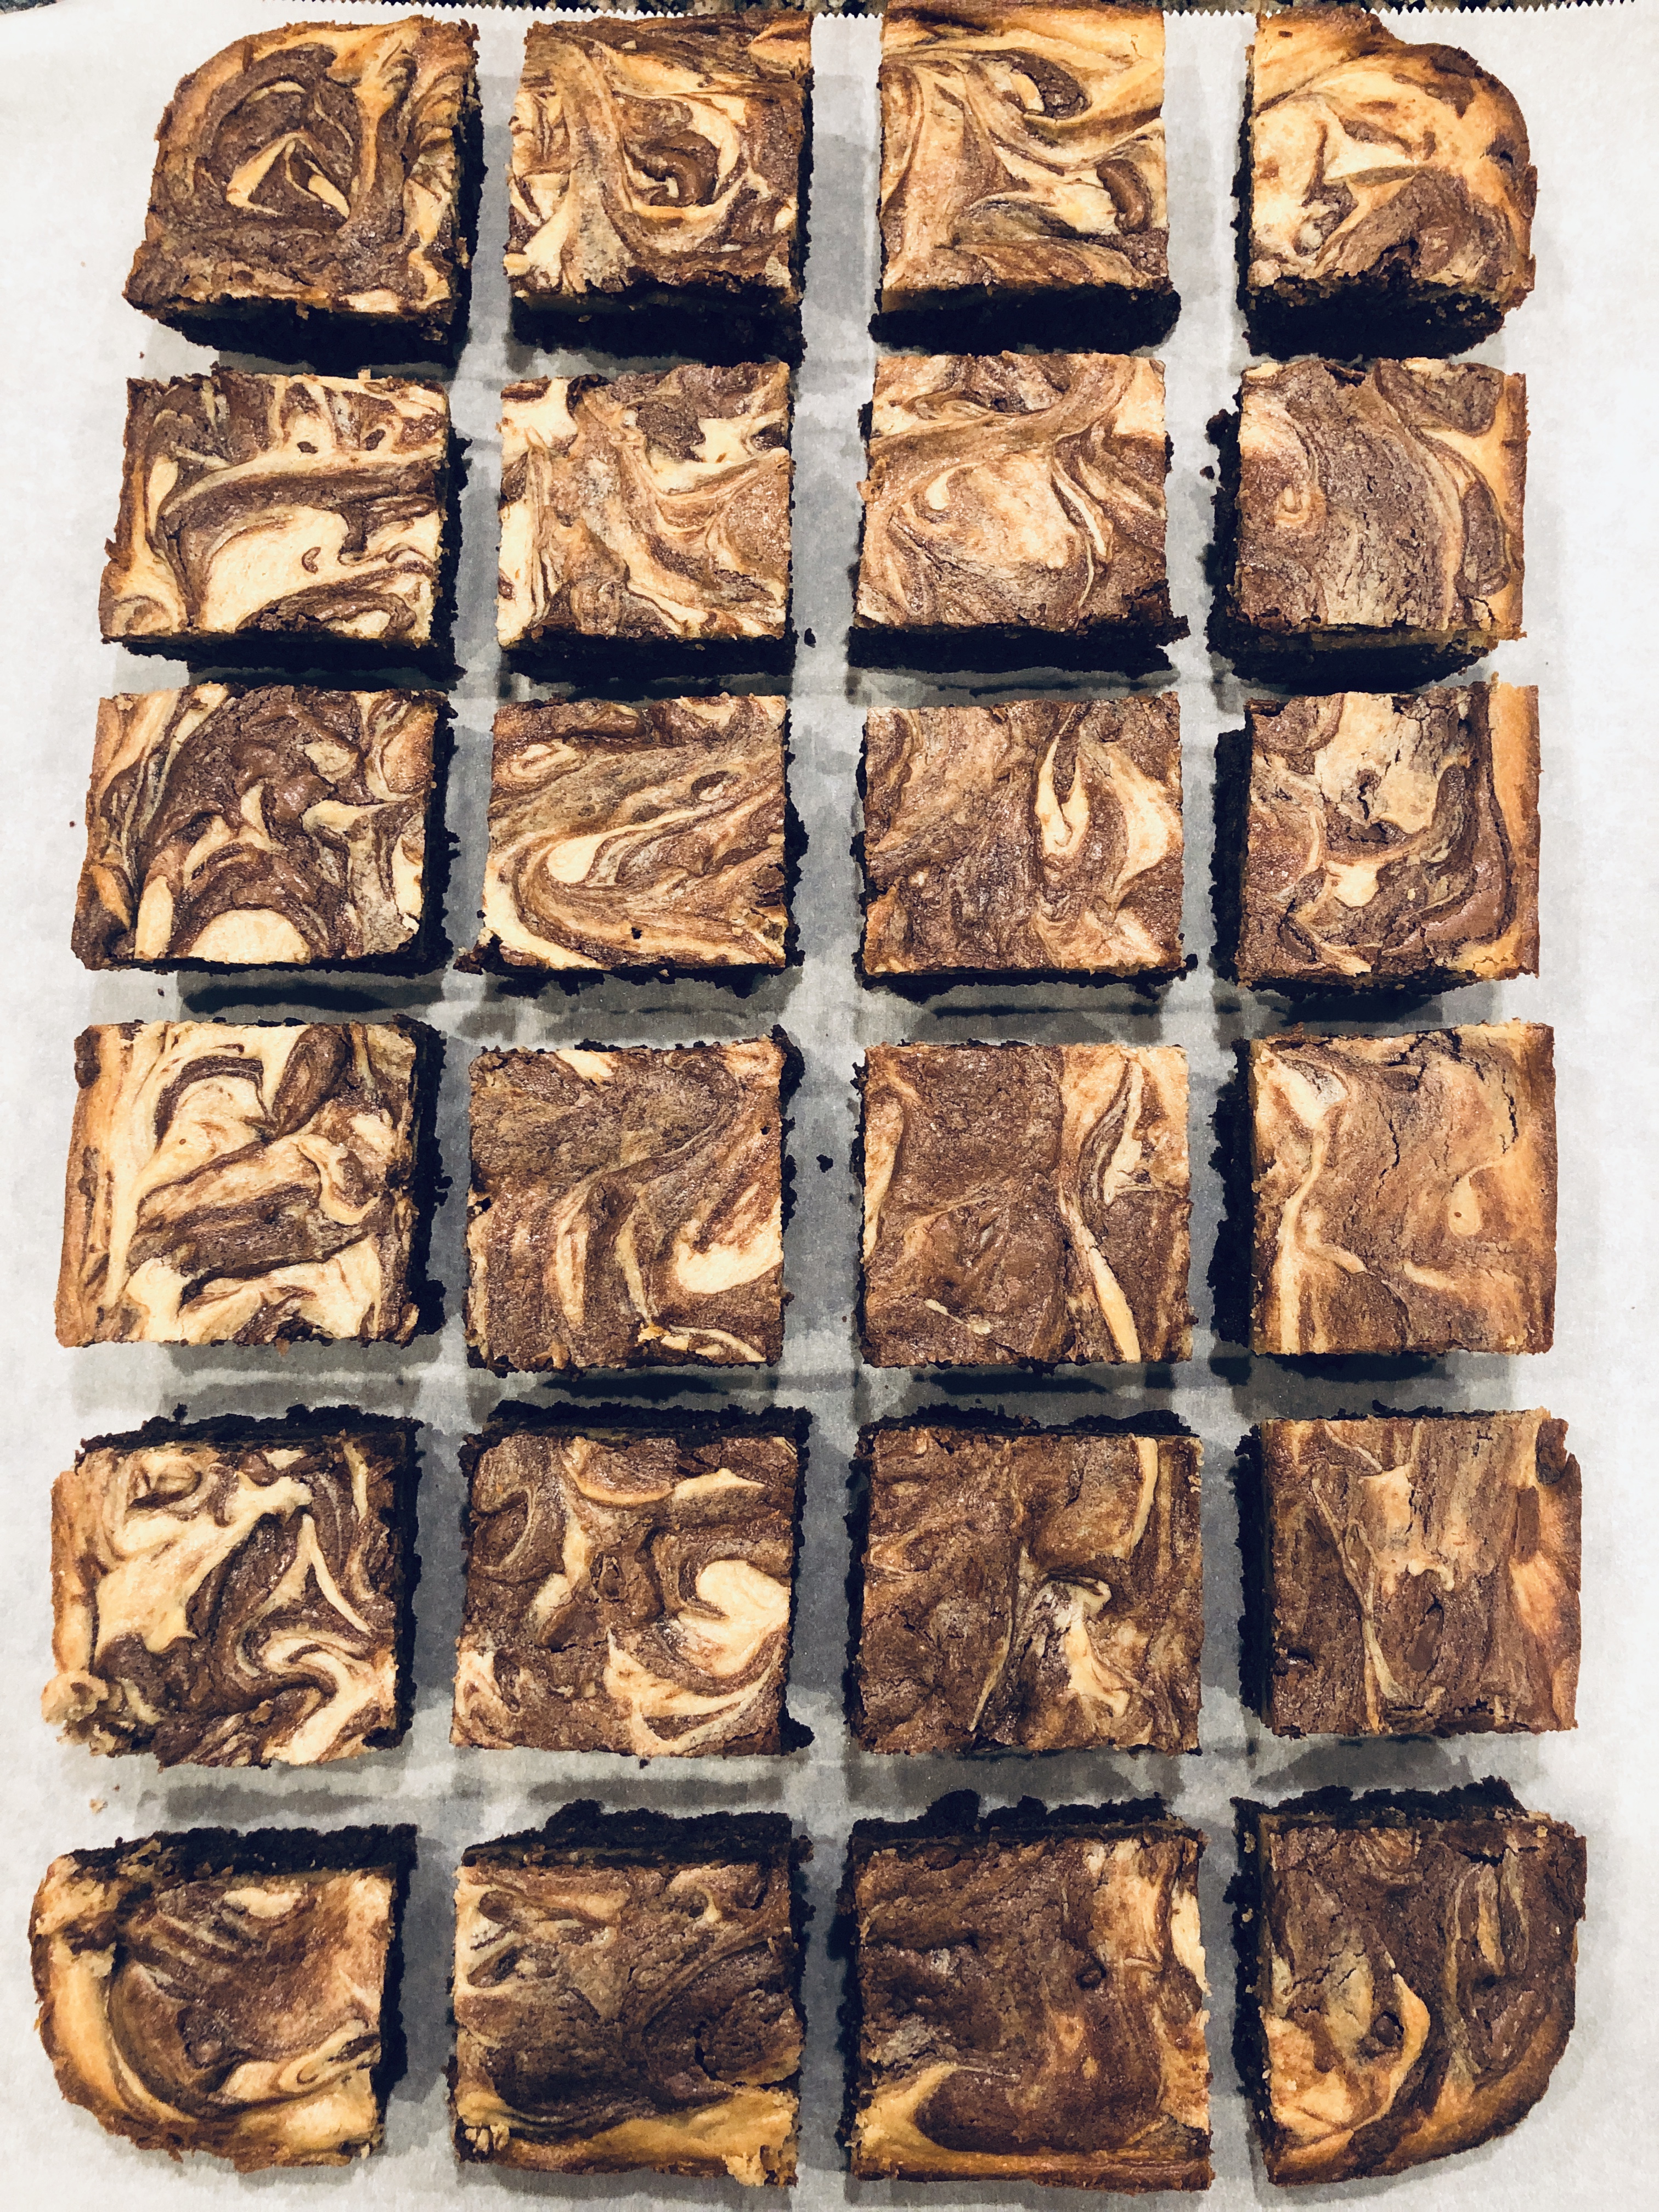 Michelle's Peanut Butter Marbled Brownies